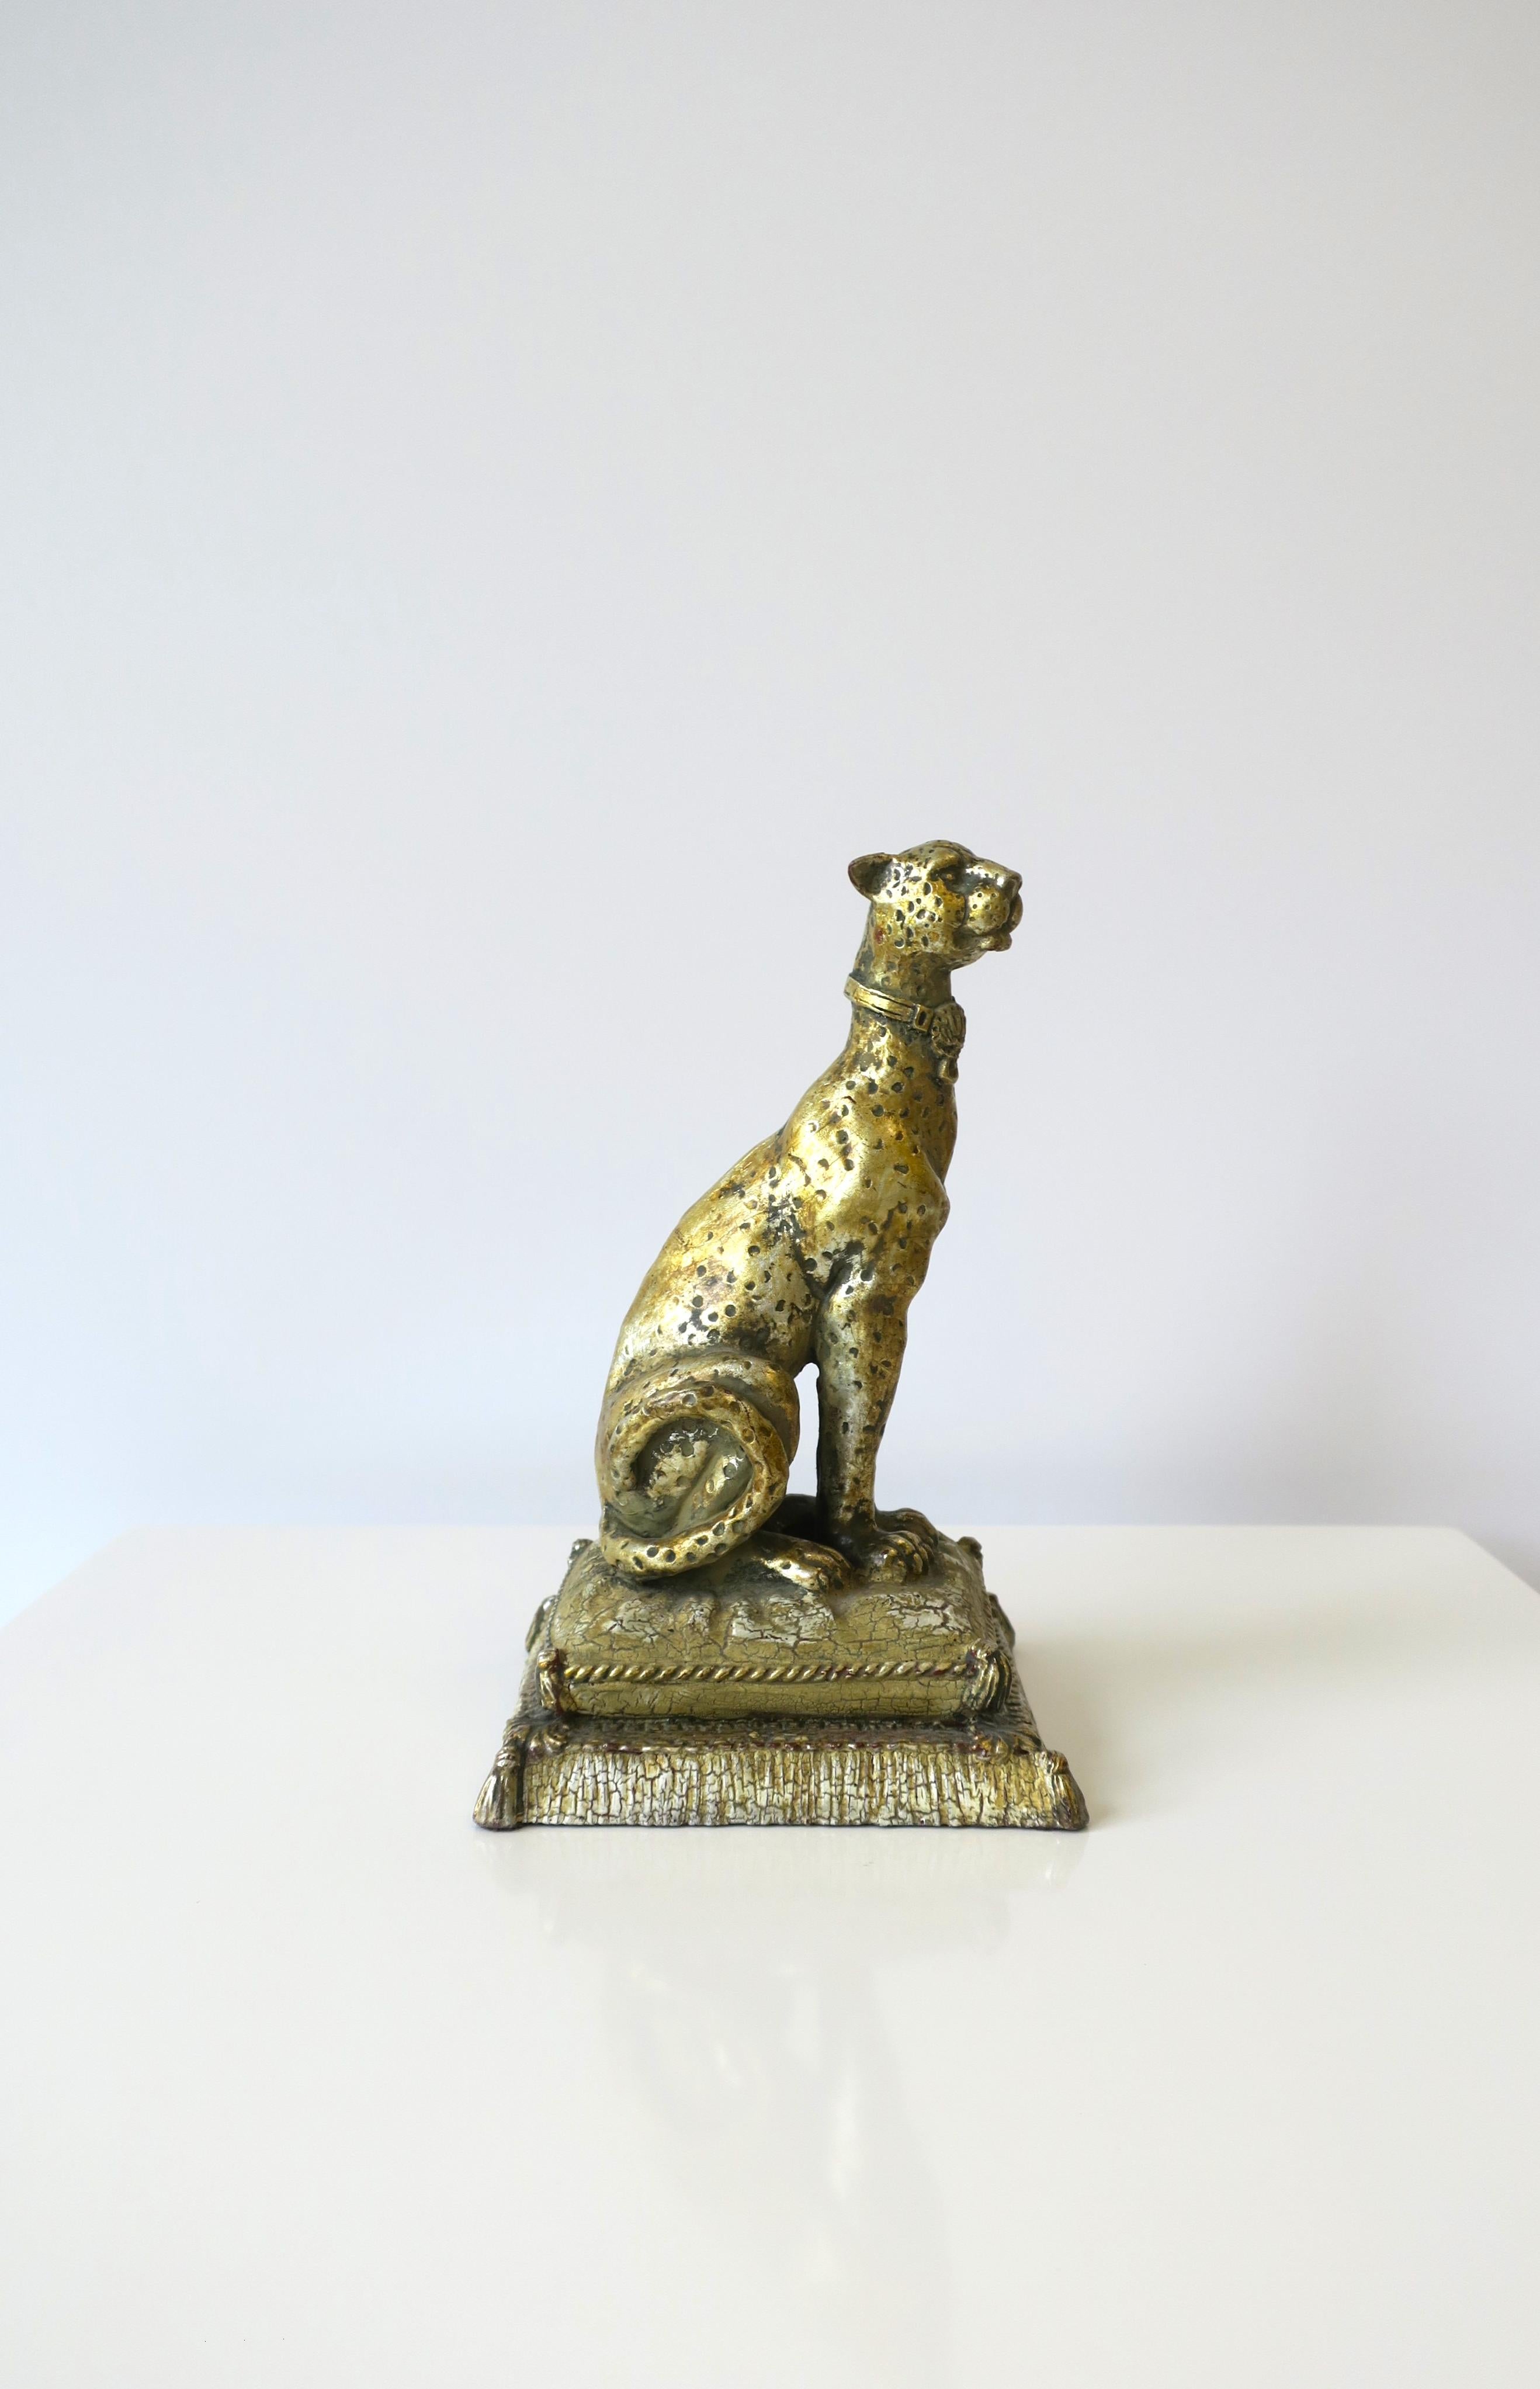 A regal Art Deco leopard cat decorative object, circa late-20th century. Leopard cat is hand-painted in gold with touches of silver, has detailed features in tail, face, collar, paws, while sitting atop a fluffy pillow with tassels. A great